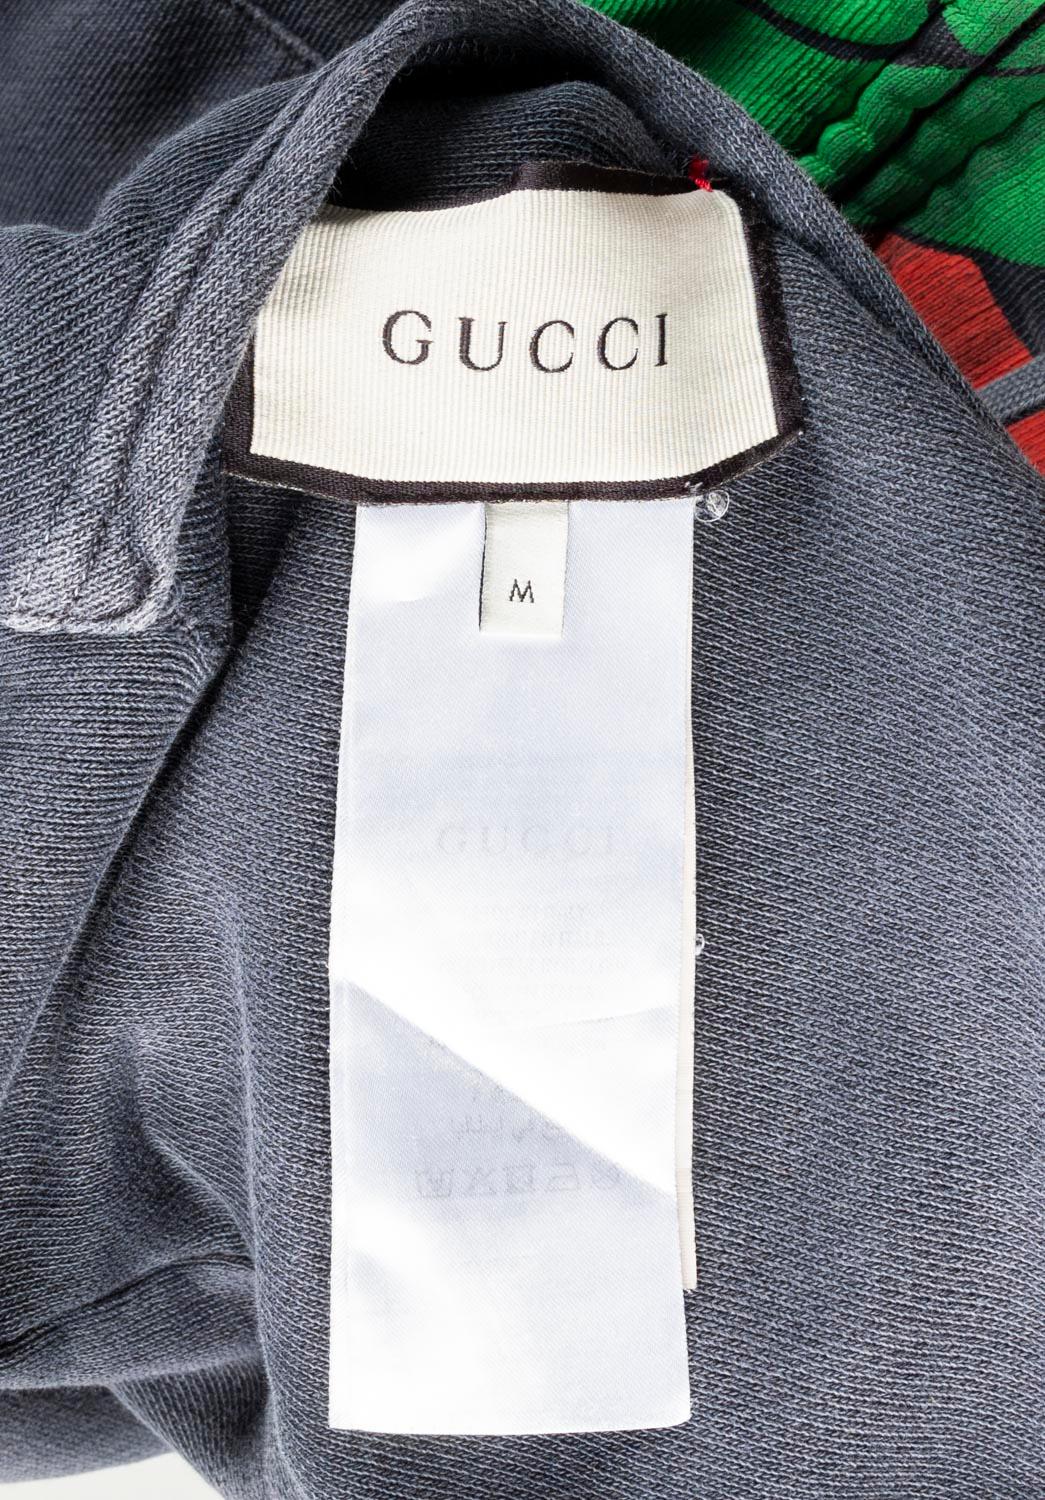 Gucci Men Jumper Hooded Distressed Full Zip Heavy Reversible Jacket, Size M, S66 For Sale 5